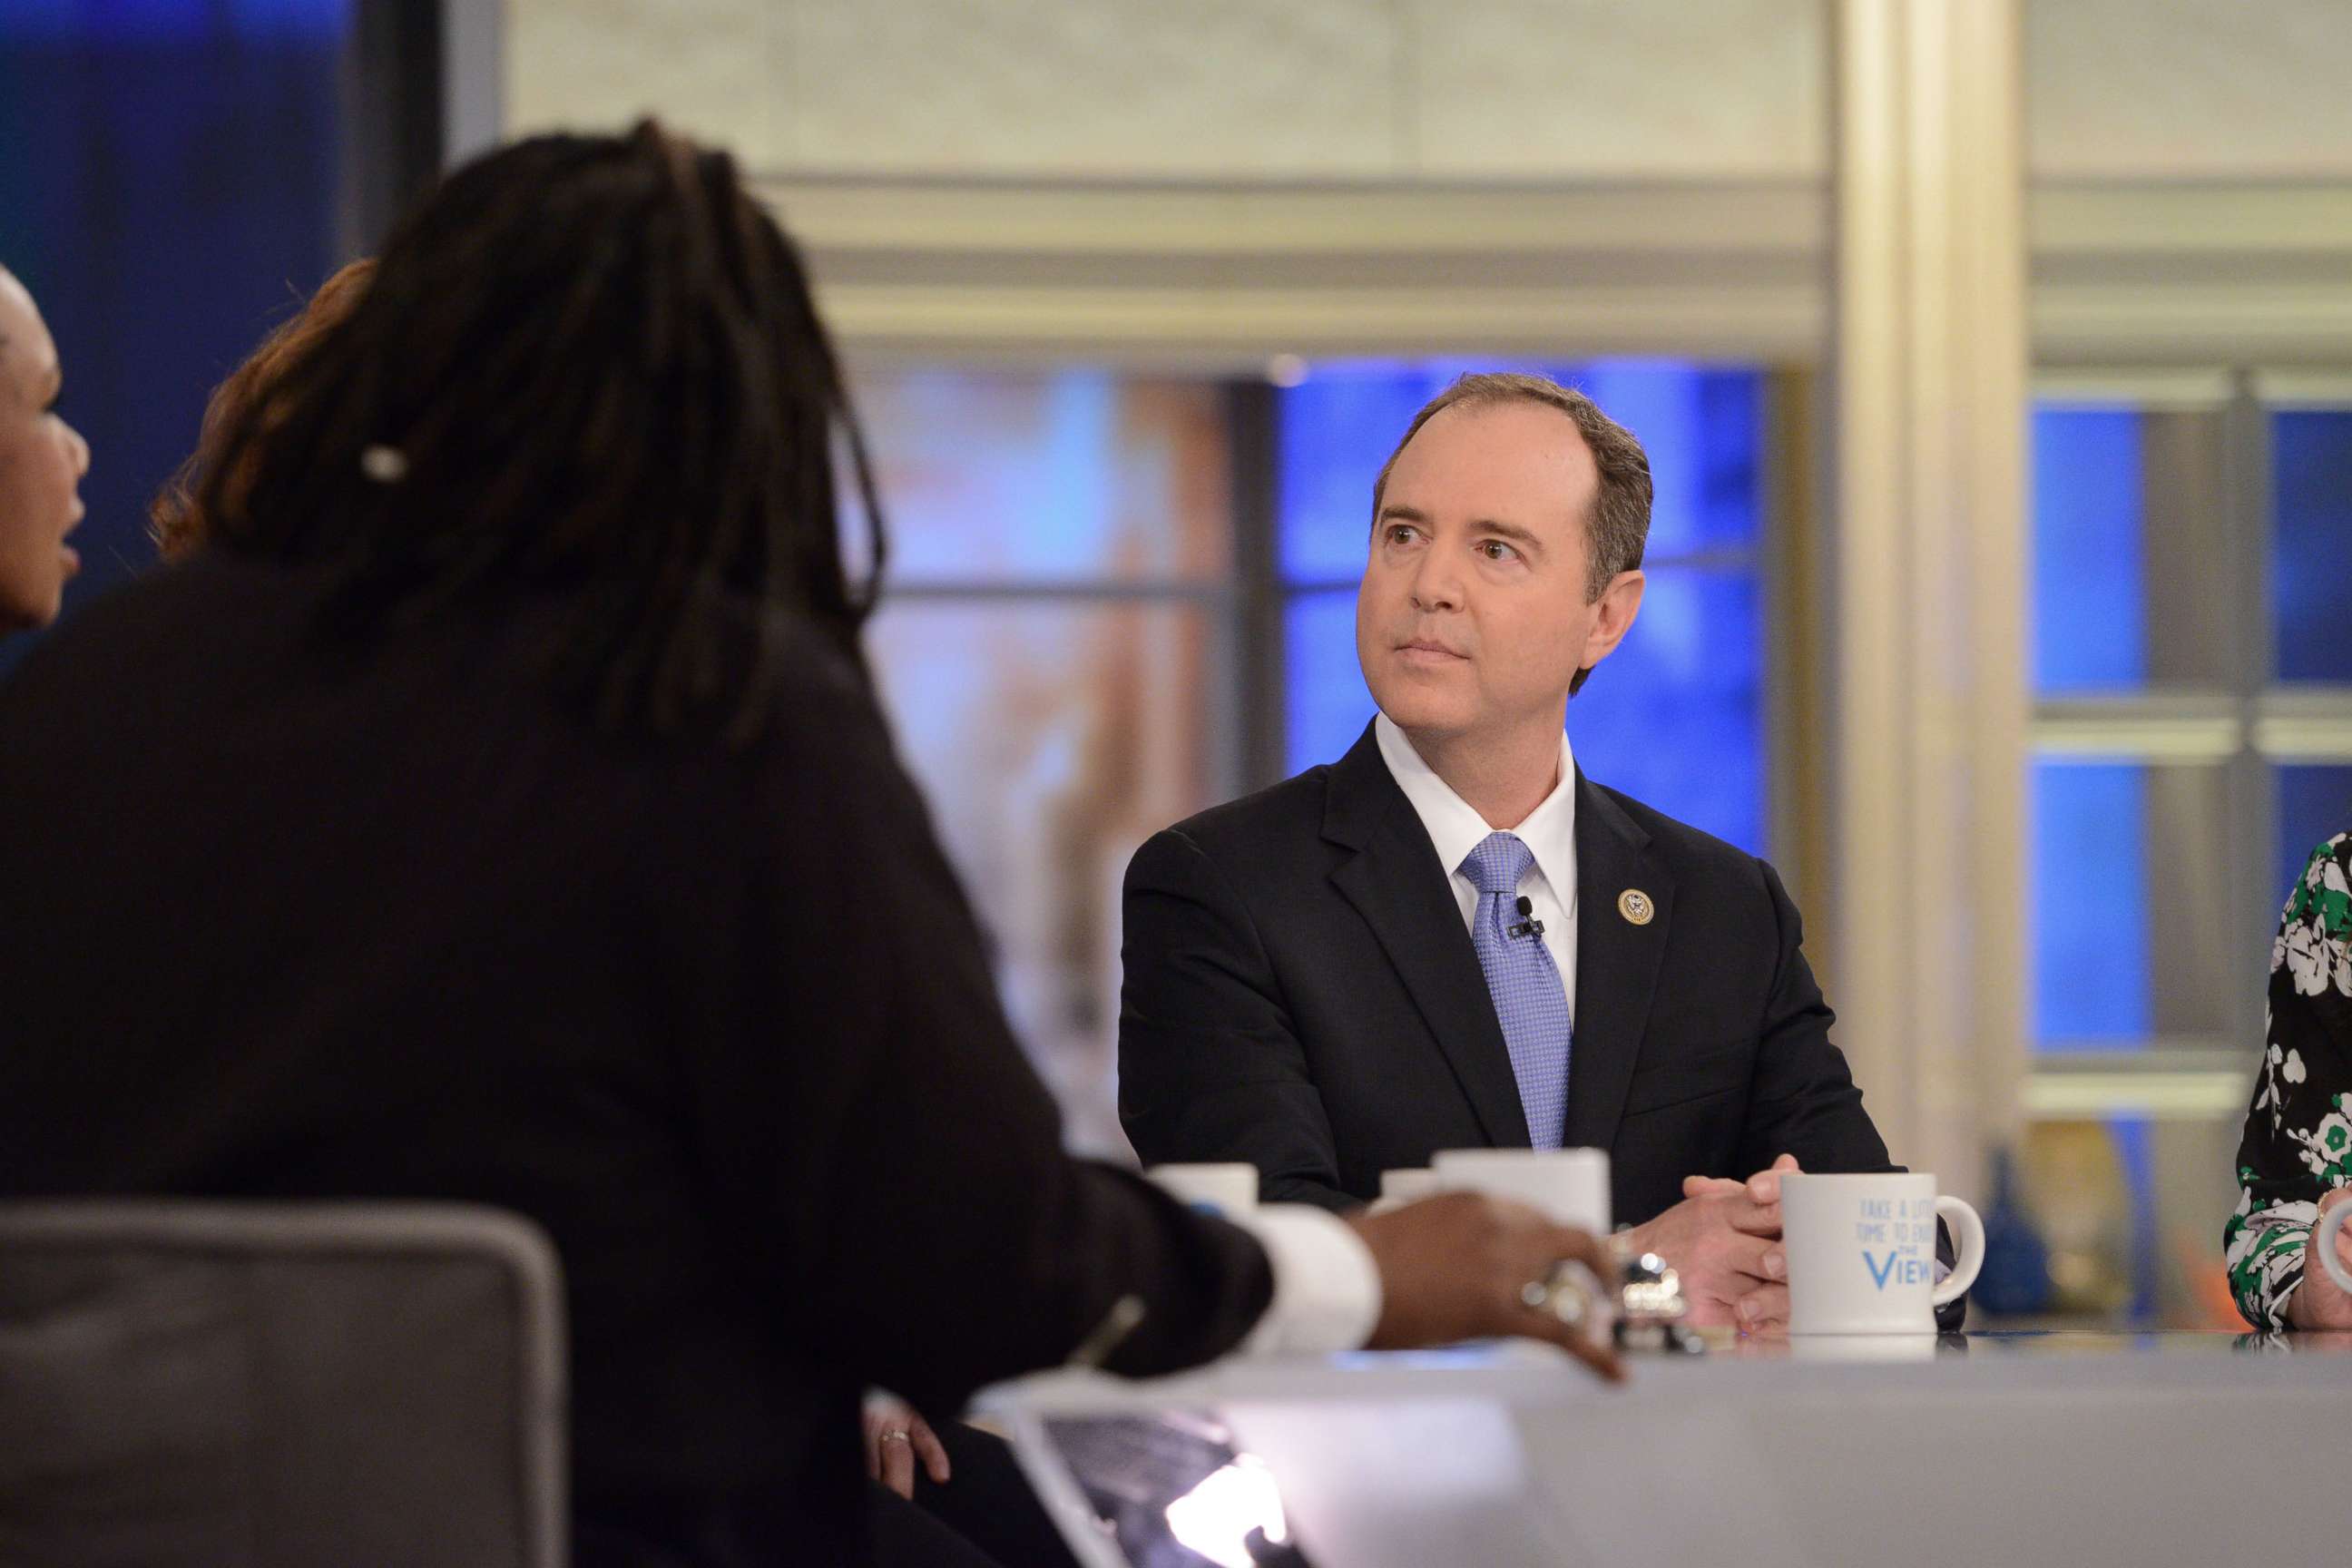 PHOTO: Representative Adam Schiff listens during an appearance on ABC's "The View," March 1, 2018.